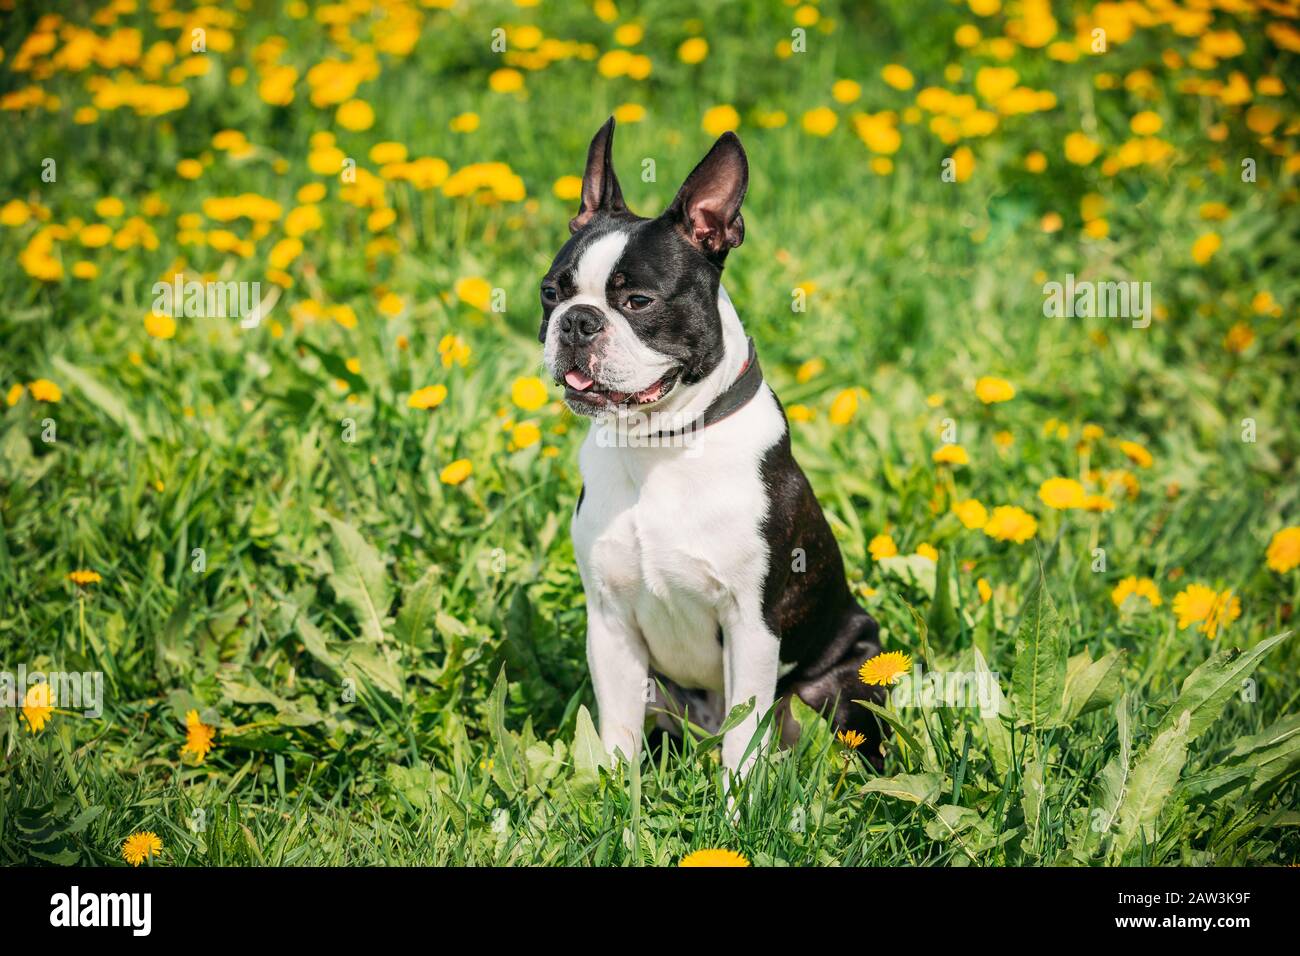 Funny Young Boston Bull Terrier Dog Outdoor In Green Spring Meadow With Yellow Flowers. Playful Pet Outdoors. Stock Photo